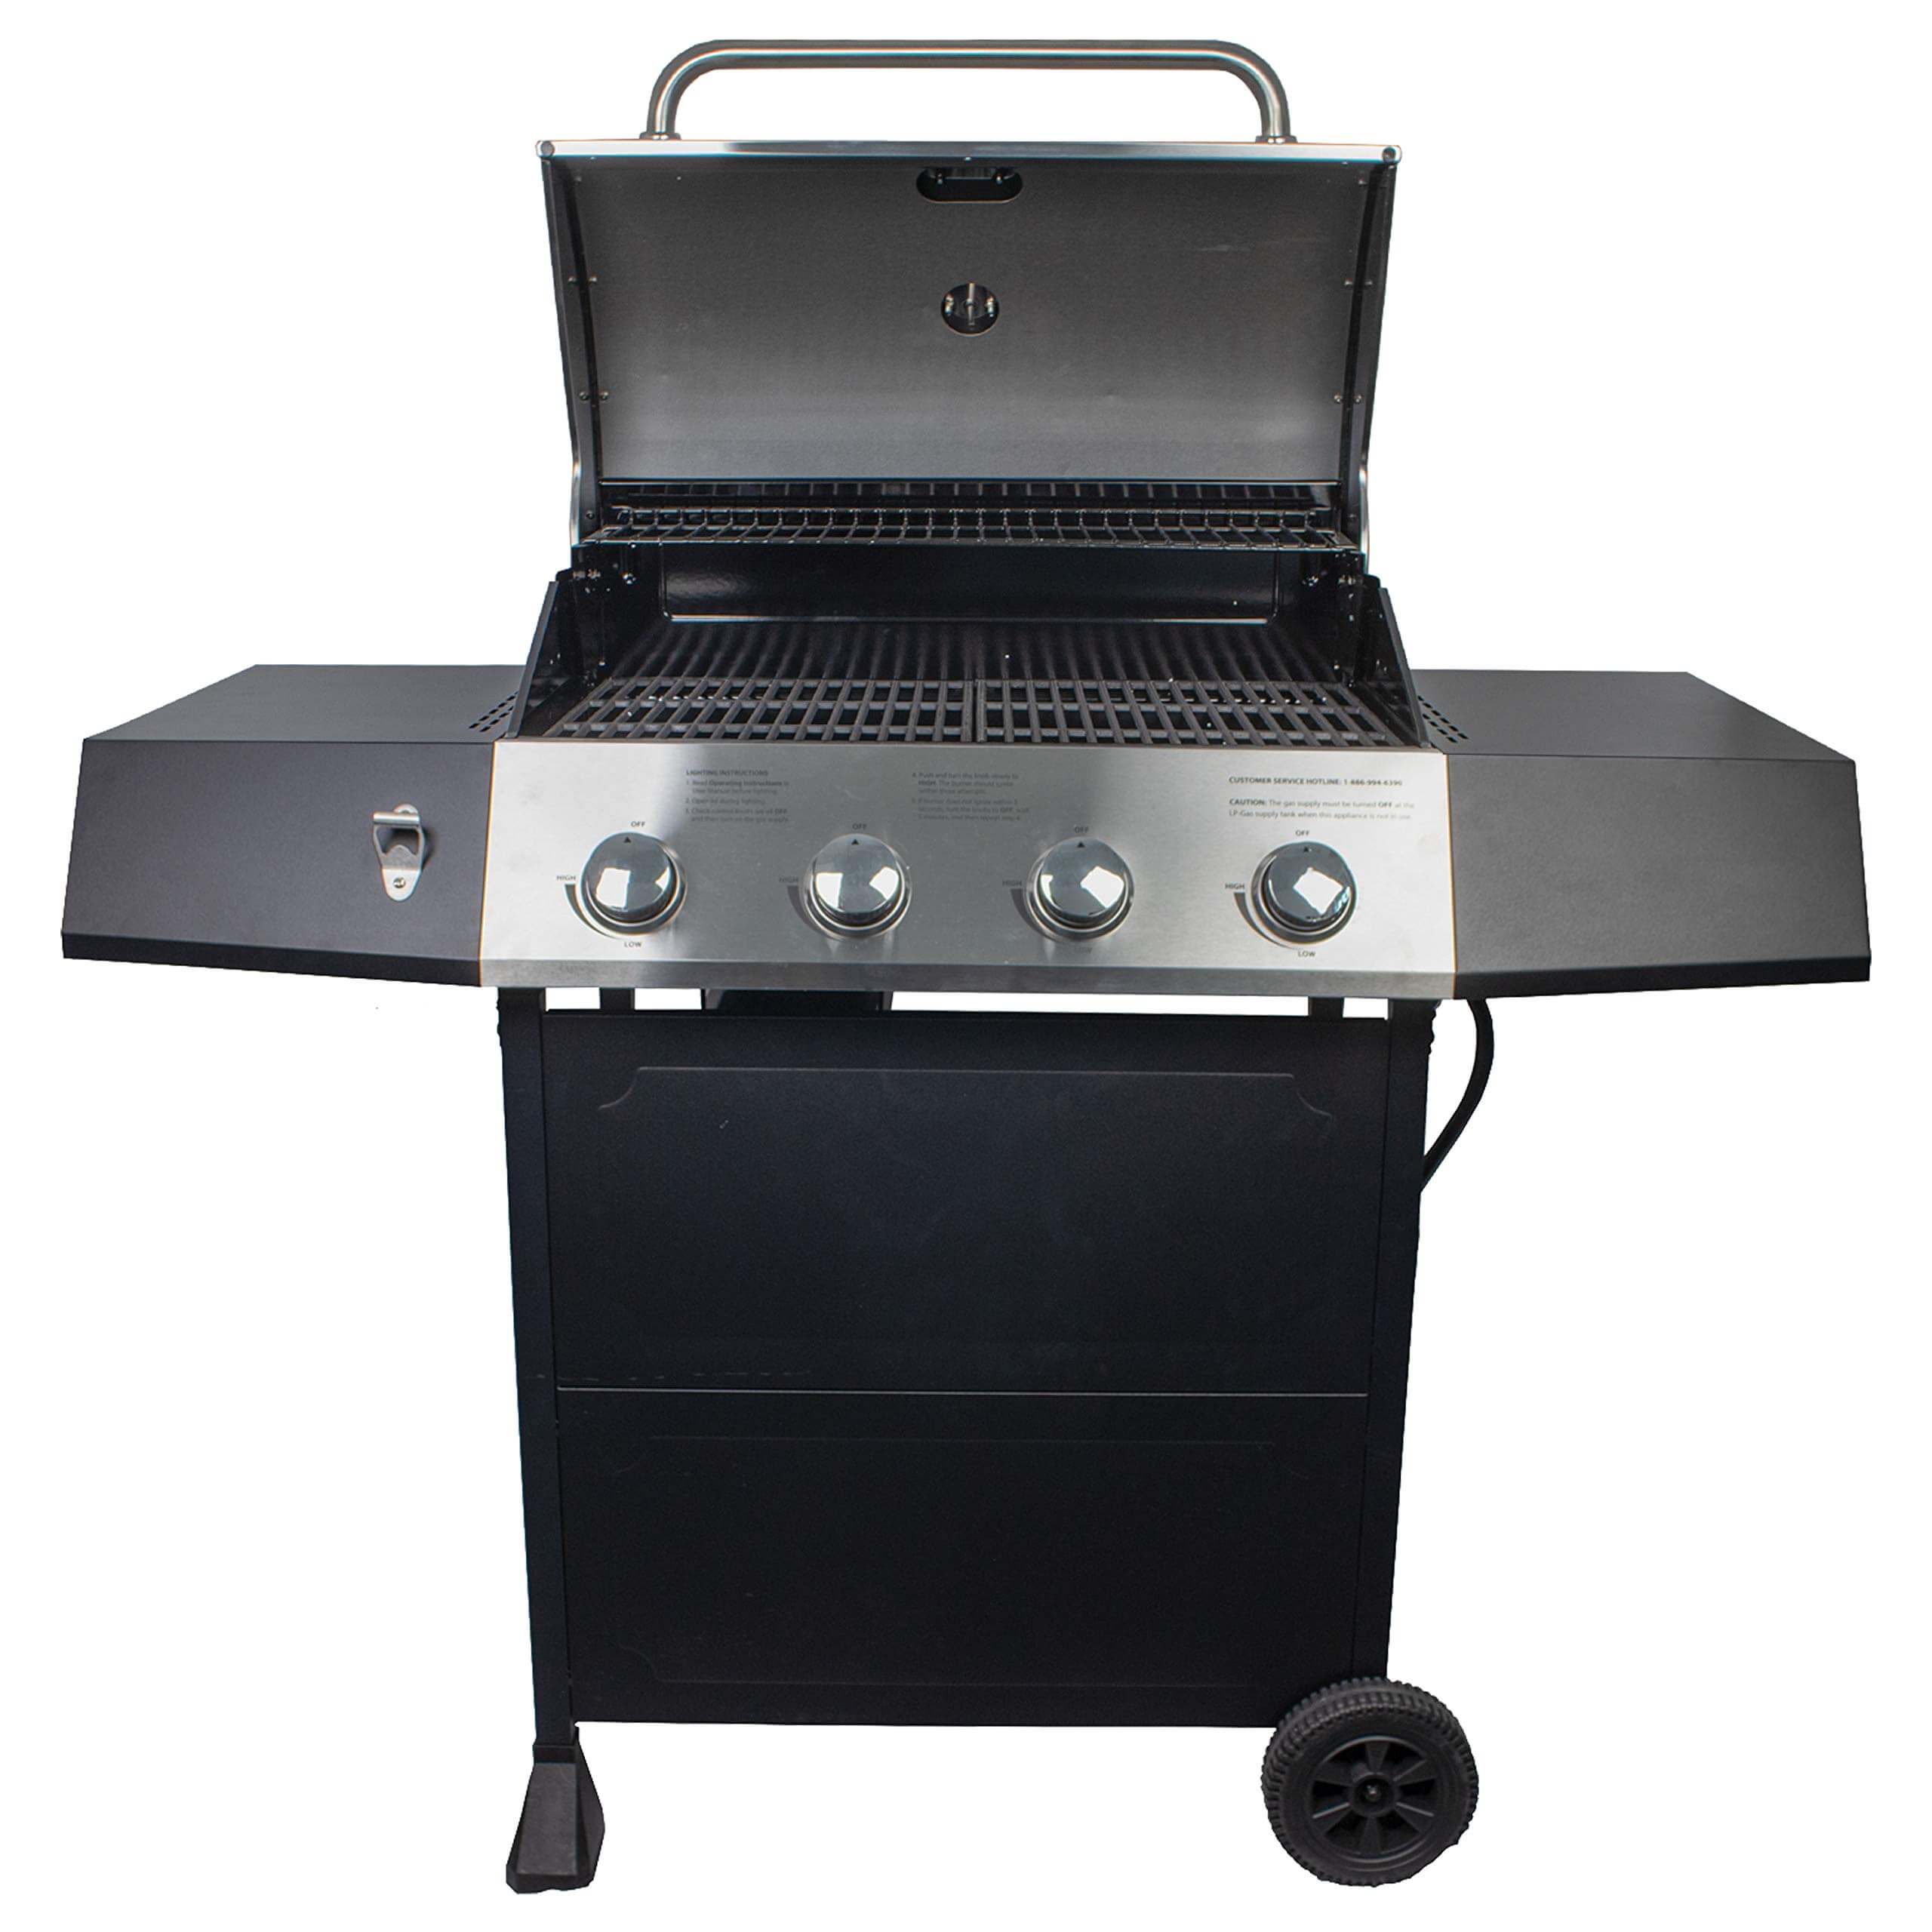 Cuisinart CGG-7400 Full Size Four Burner Gas Grill, best value gas grill, best rated gas grills, best gas grills under 300, best gas grill under 300, best gas grill under $200, best smokers under 300, Best Gas Grill under $300 for Delicious and Easy Home Grilling